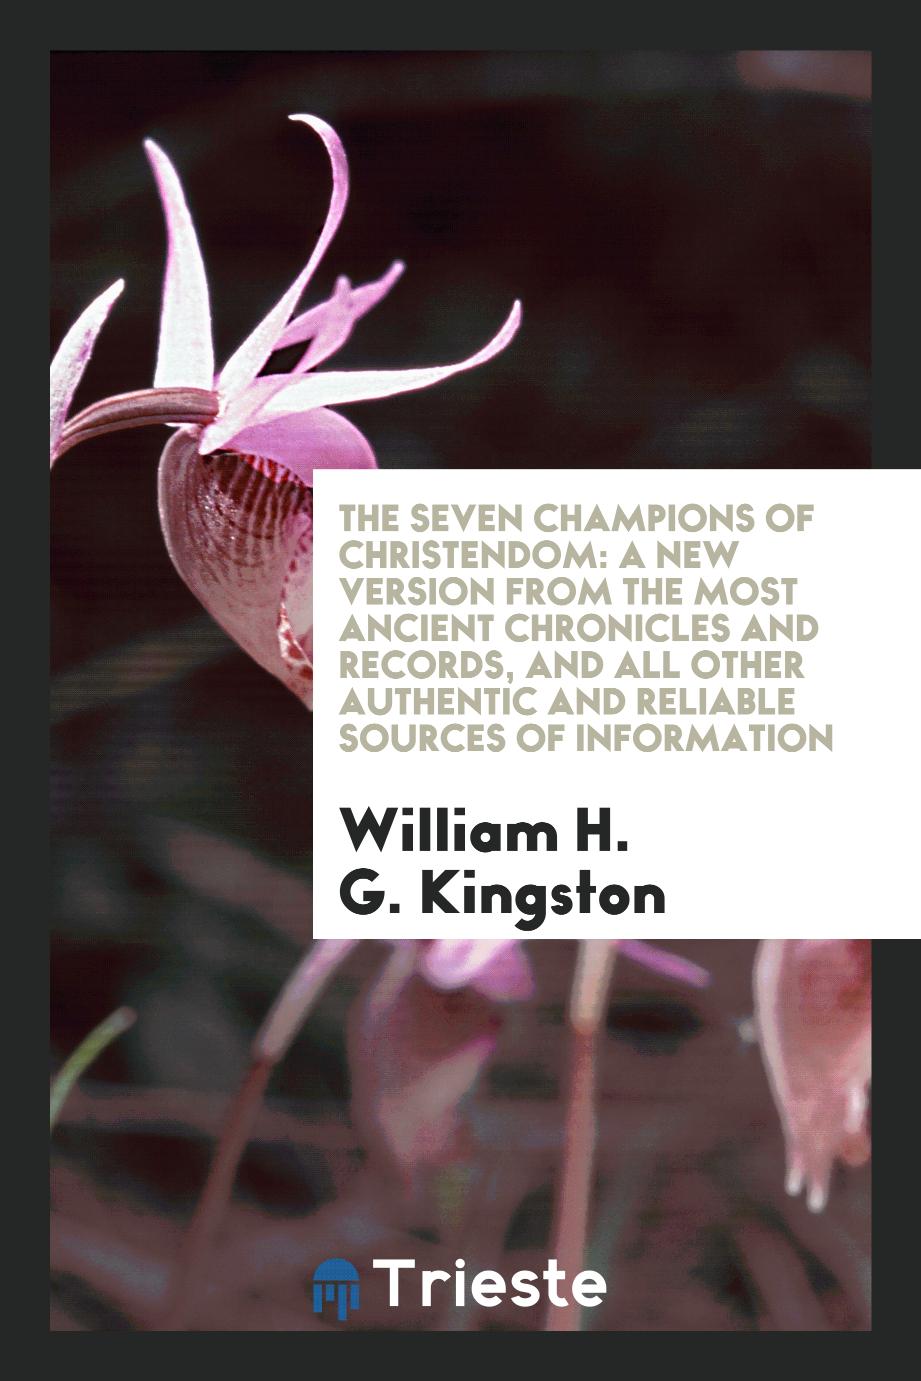 The Seven Champions of Christendom: A New Version from the Most Ancient Chronicles and Records, and All Other Authentic and Reliable Sources of Information